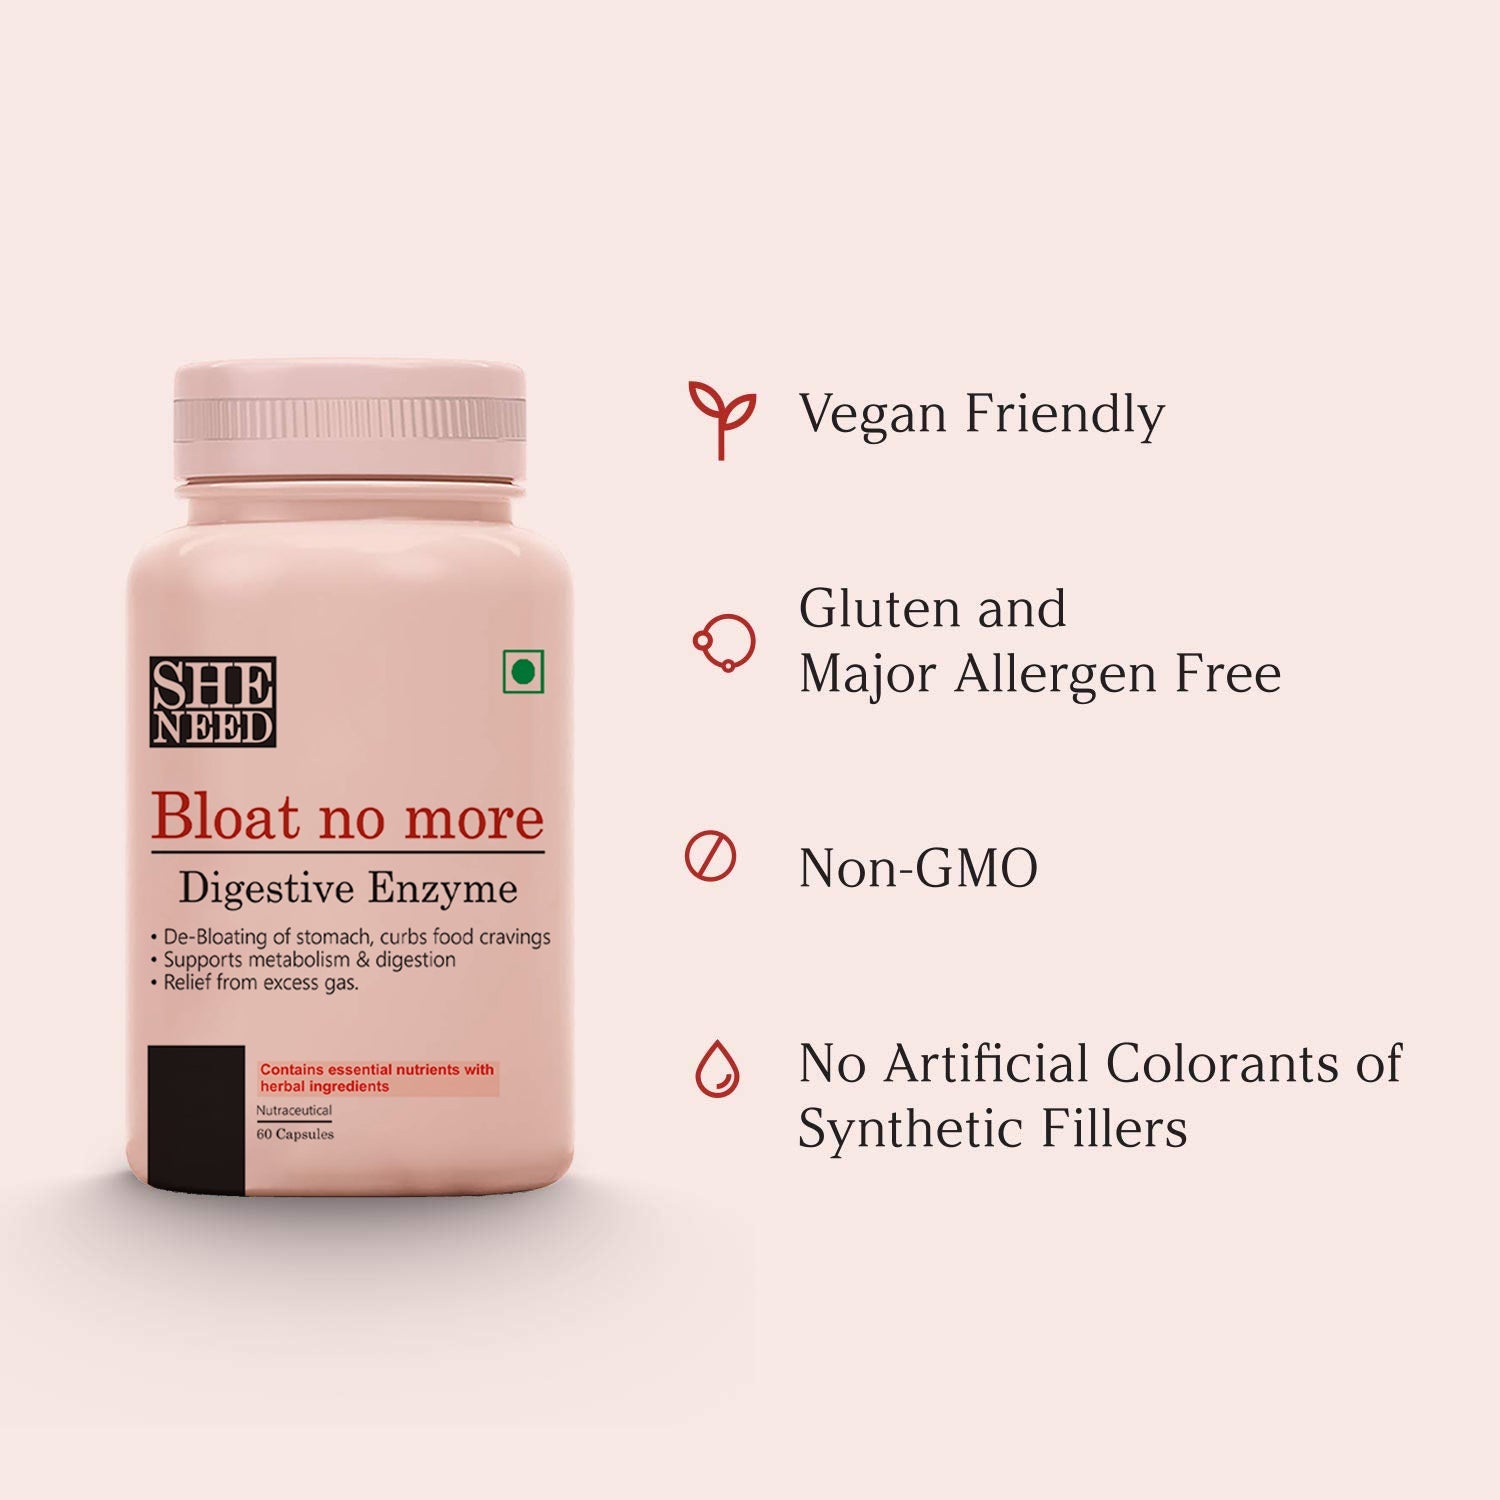 Vanity Wagon | Buy SheNeed Bloat No More Digestive Enzyme Supplement